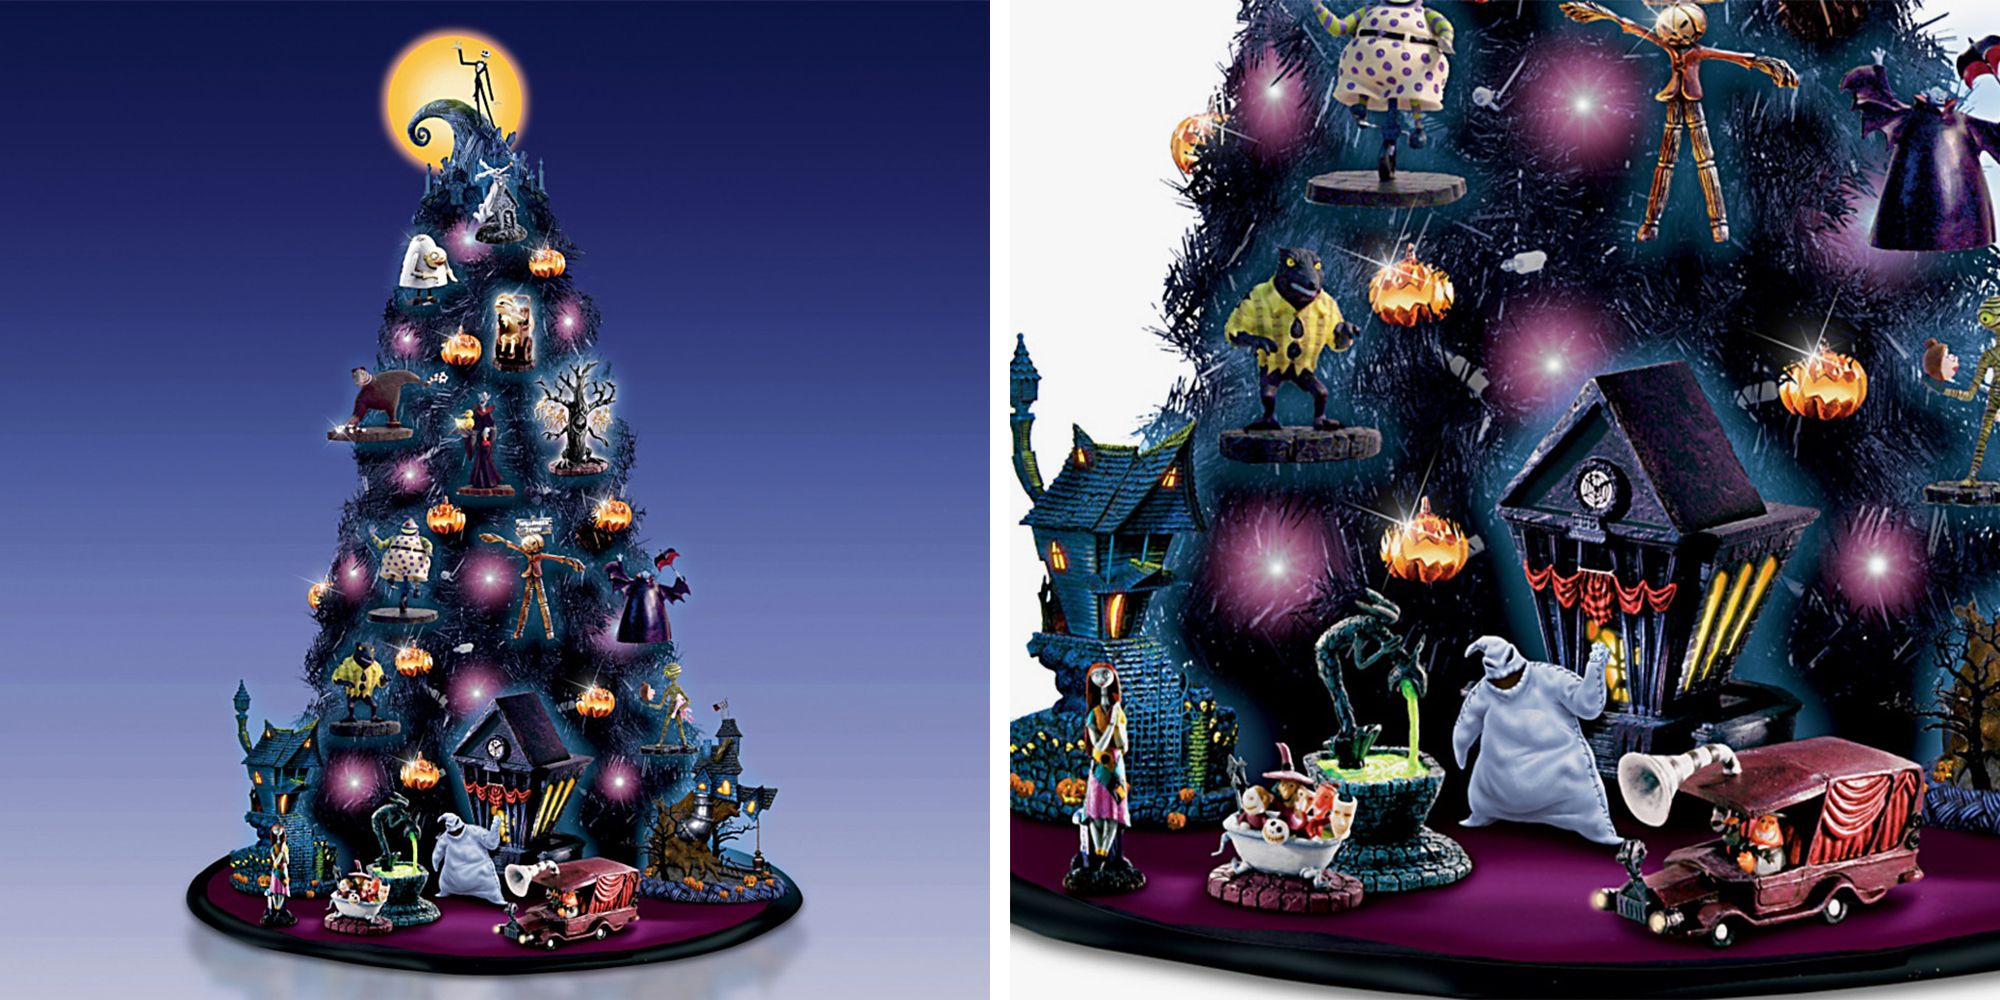 This 3-Foot 'Nightmare Before Christmas' Tree Is Covered in Purple